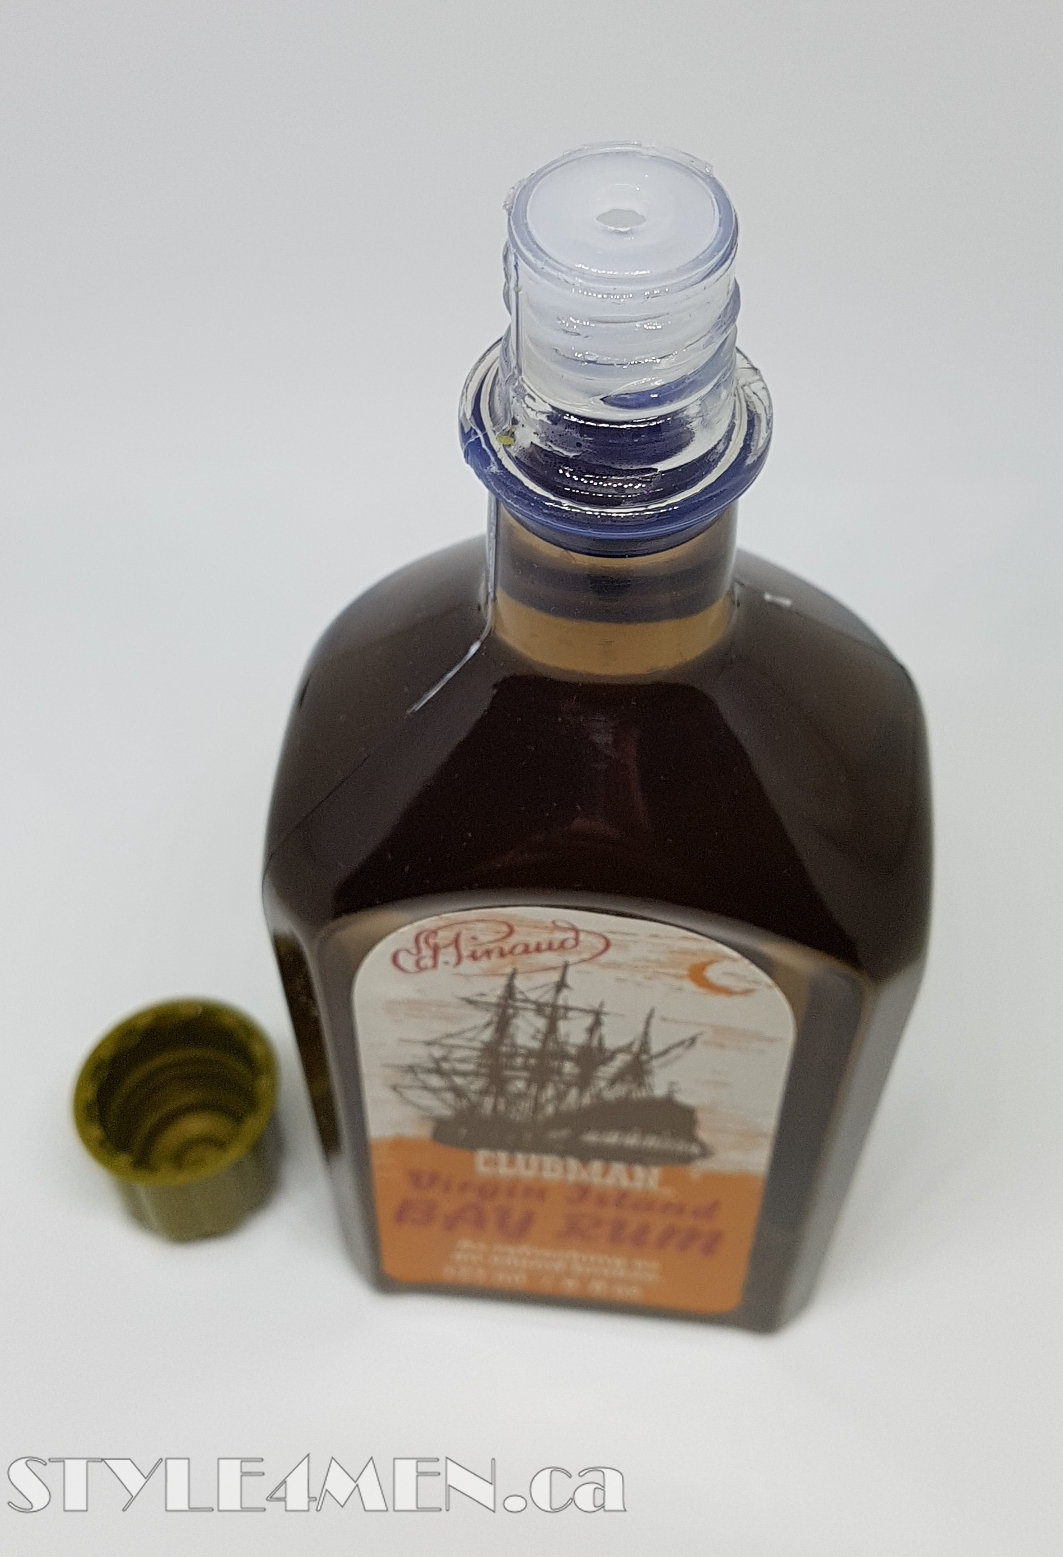 Pinaud-Clubman Bay Rum After-Shave